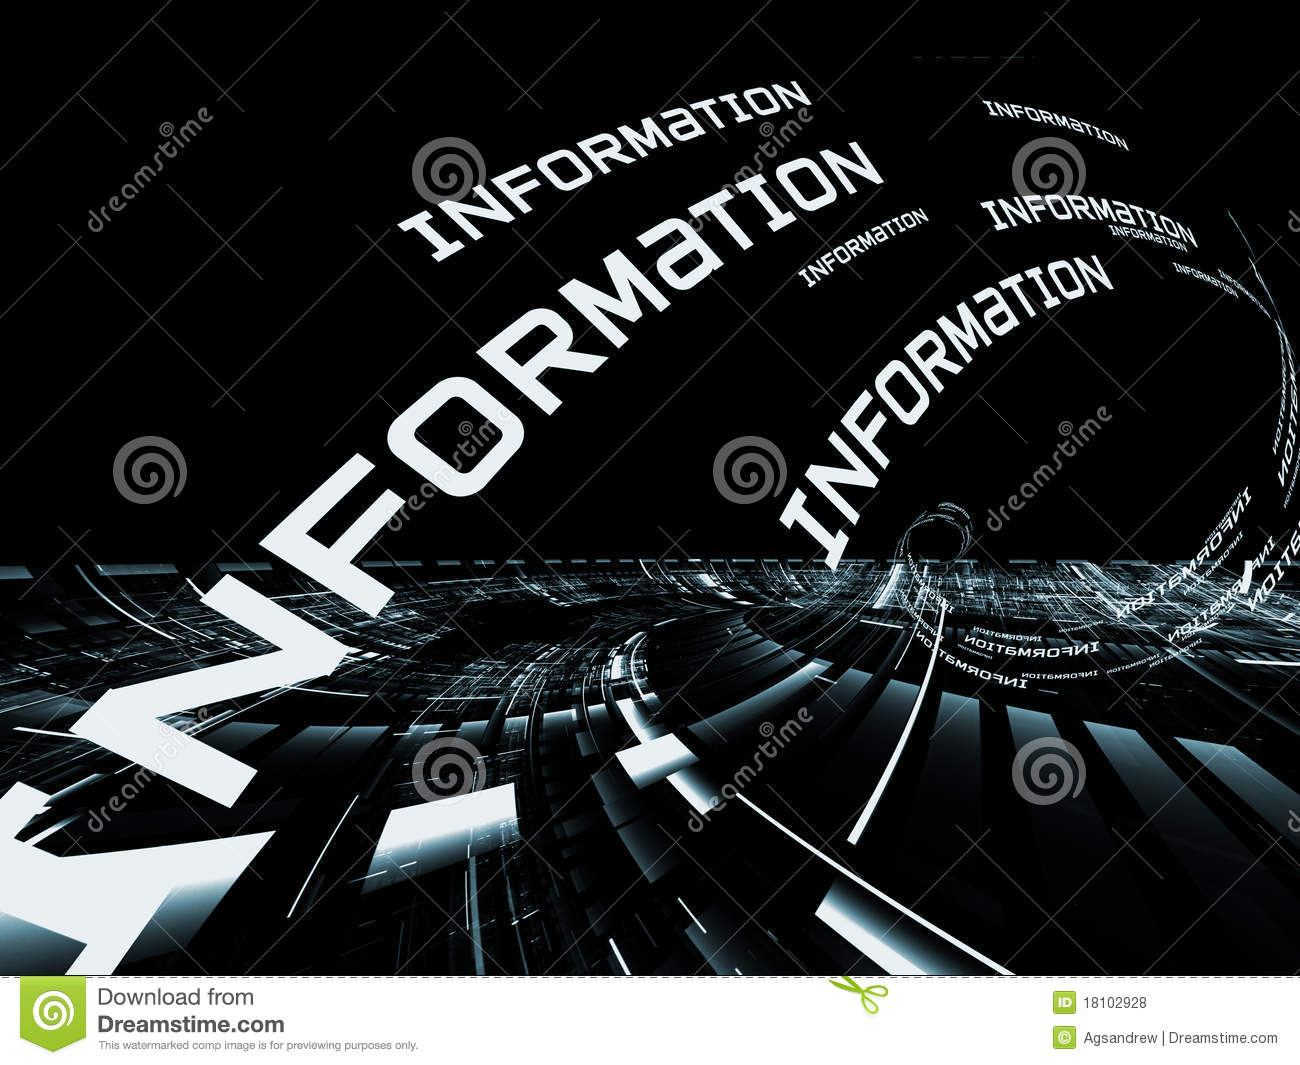 Information technology images free download free